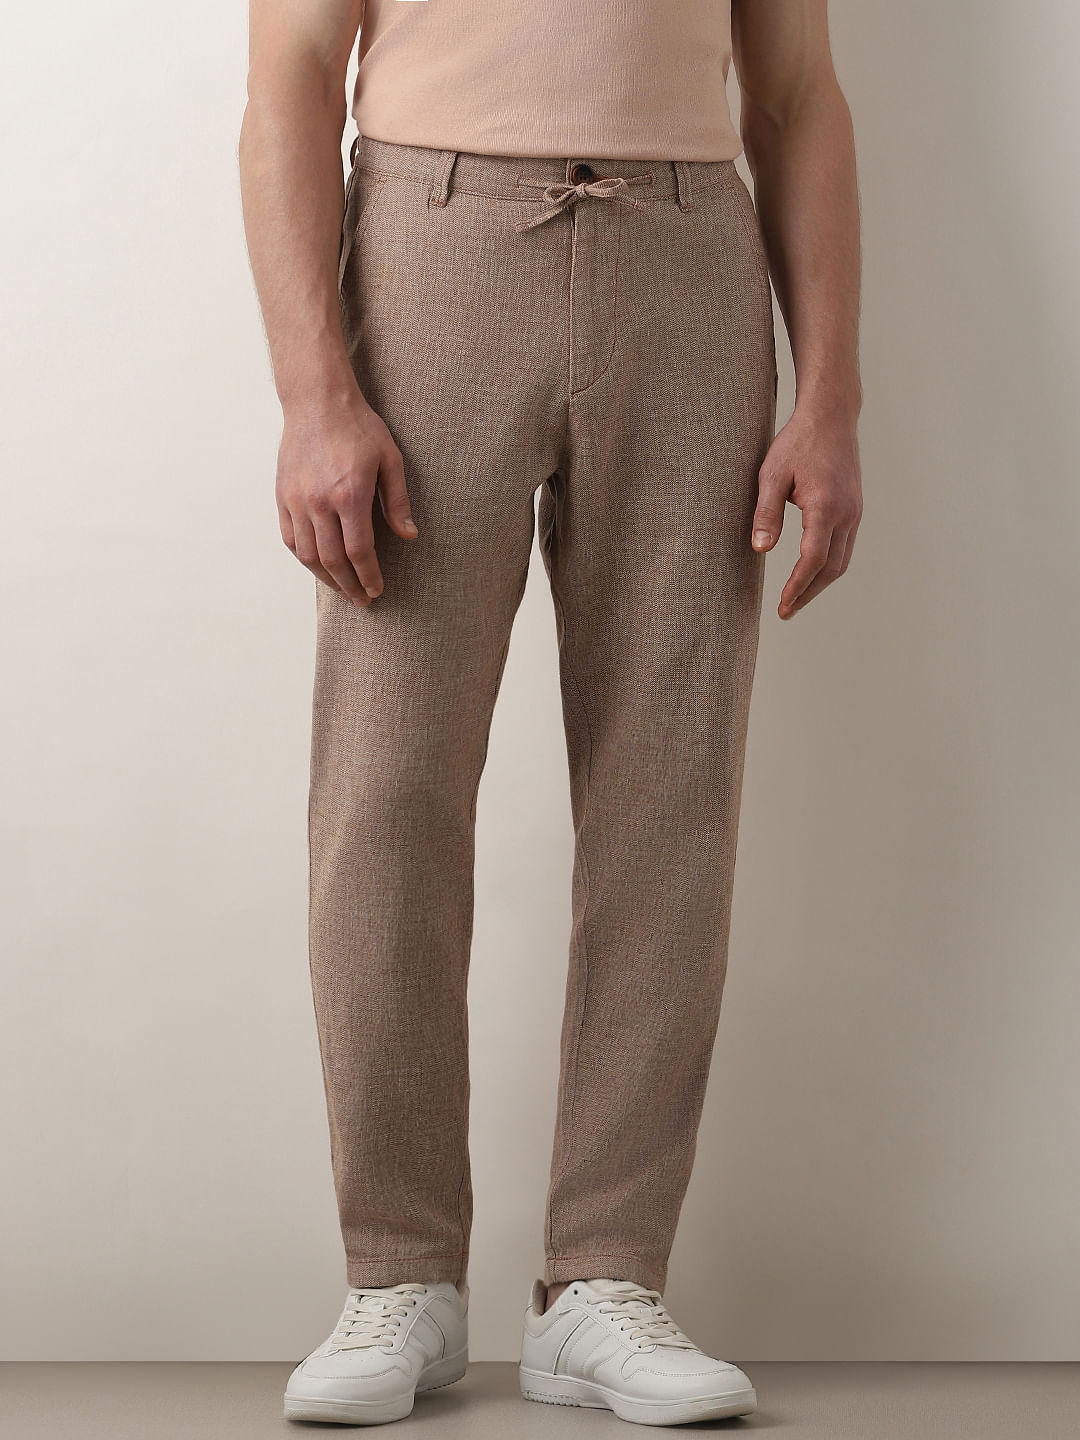 Buy Brown Town Slim Fit Chino Trouser Online for Men | Minus One